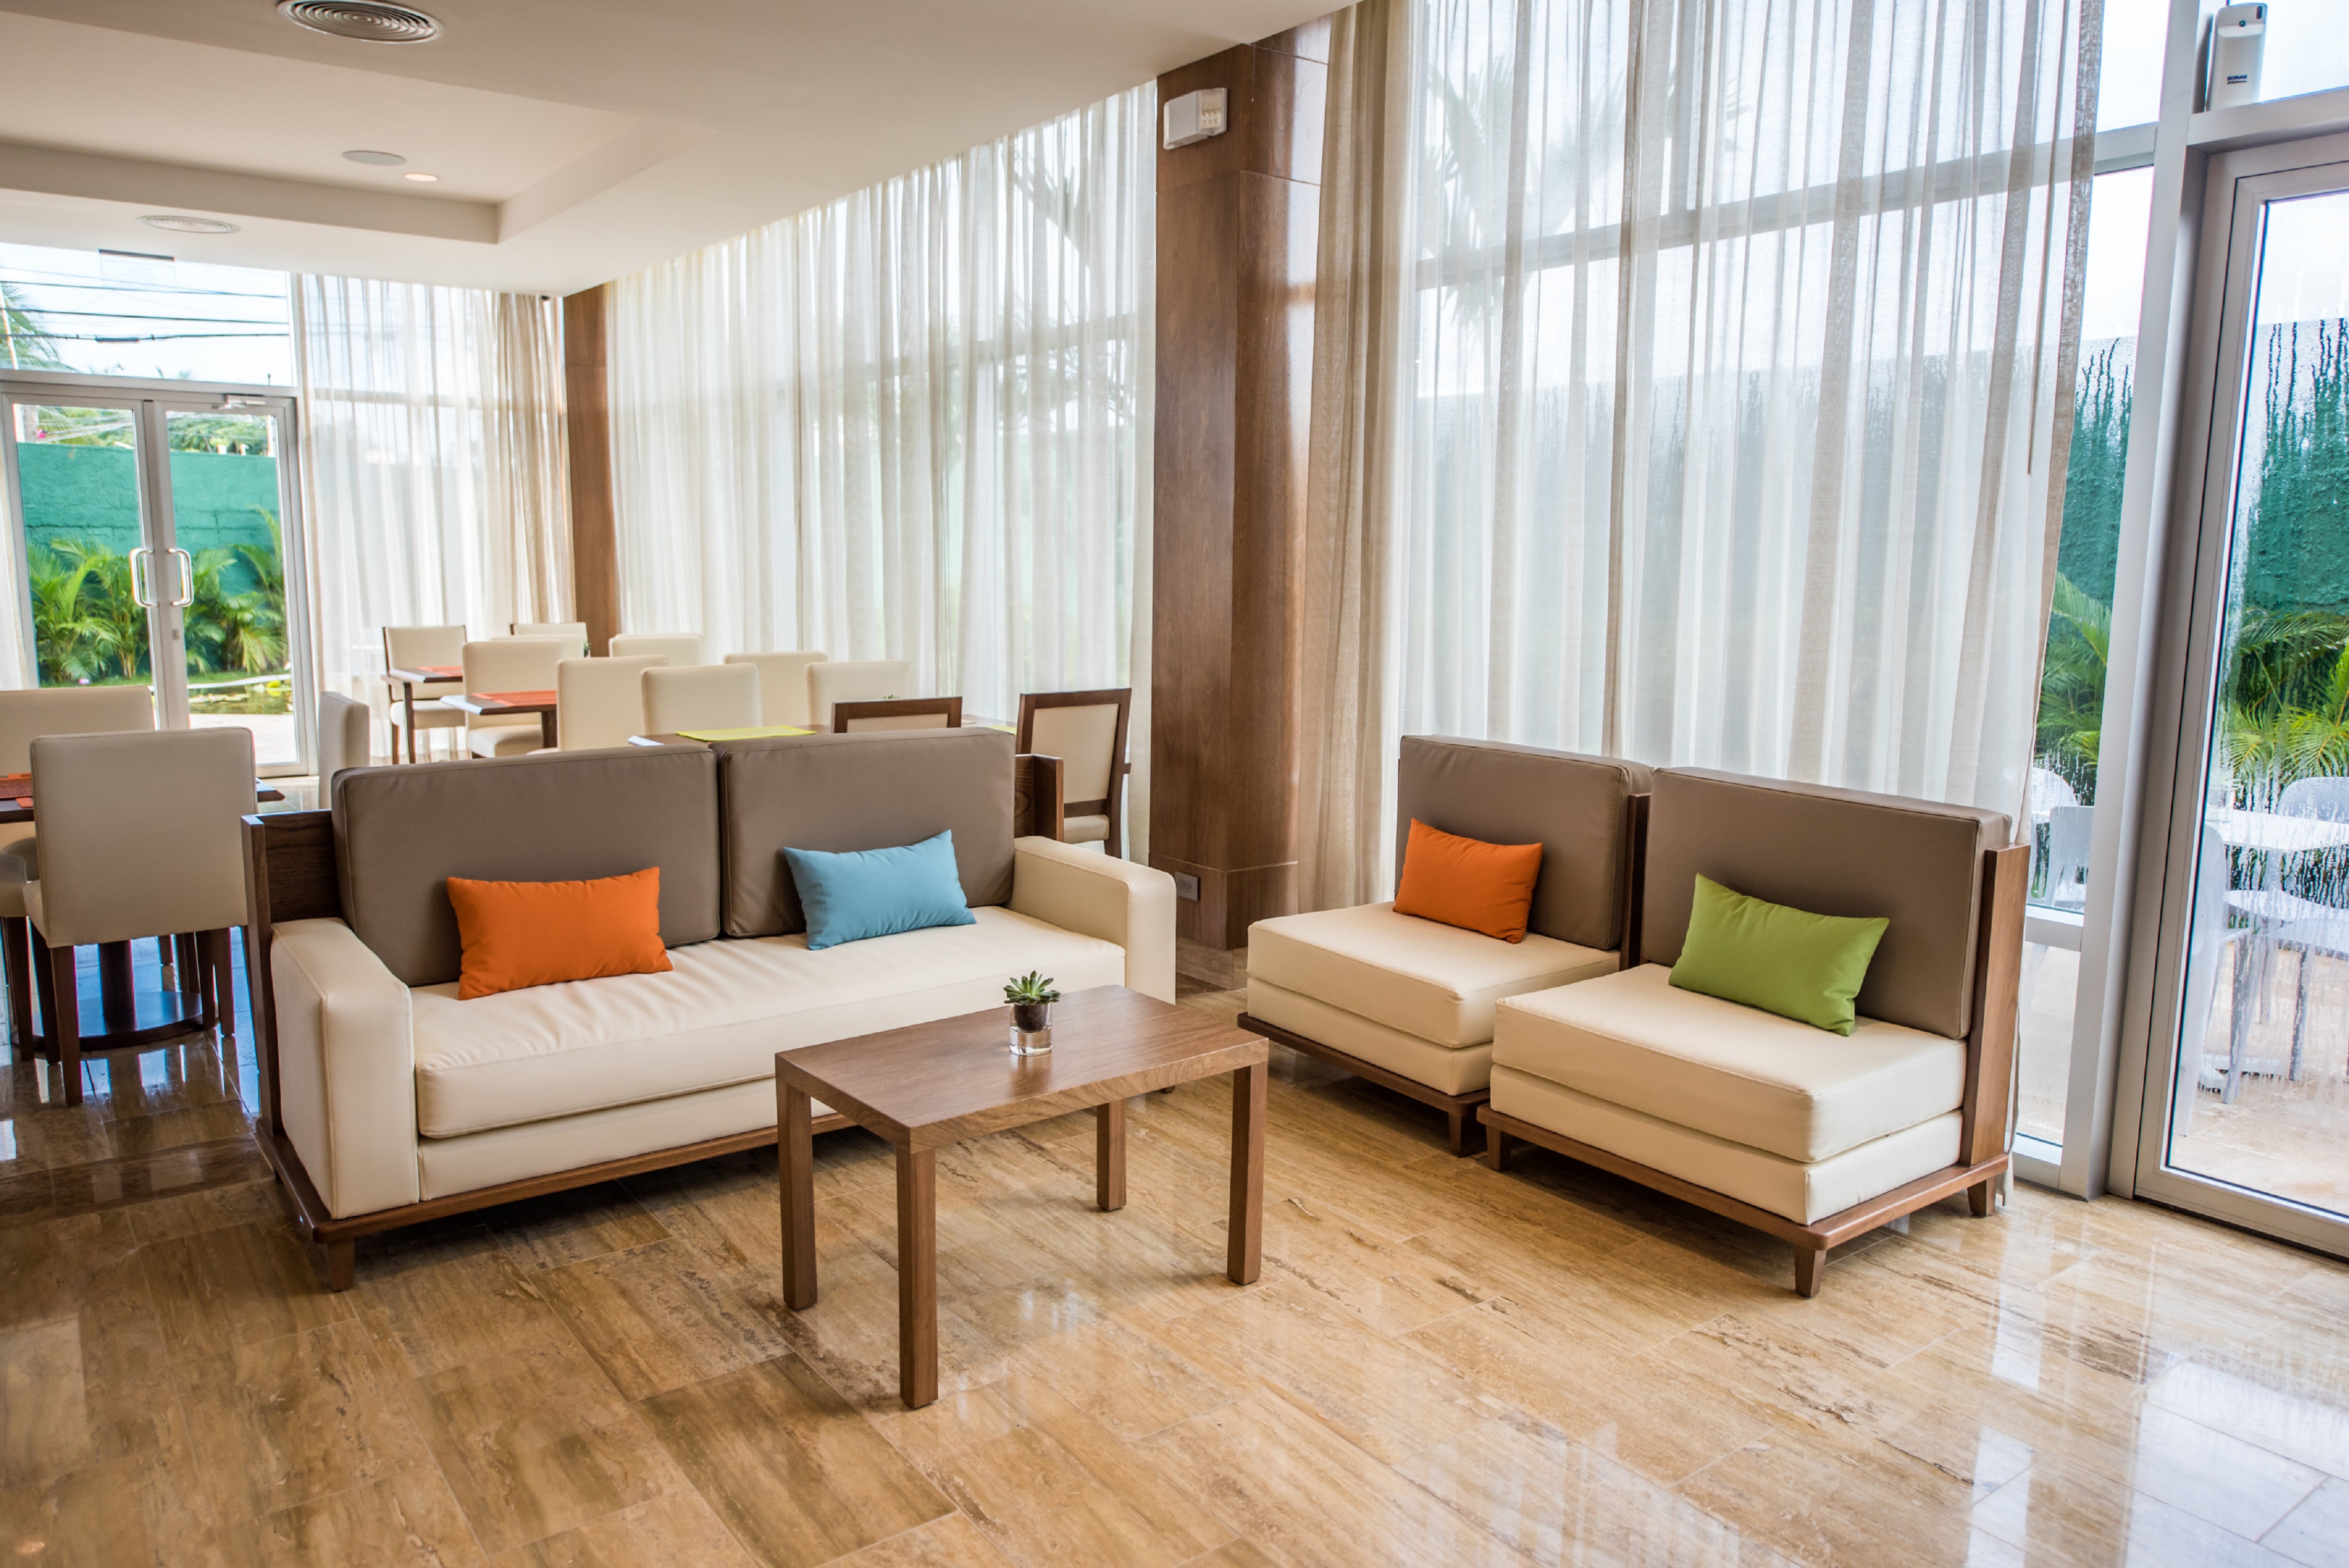 Lobby Seating Area with Sofa, Soft Chairs and Coffee Tables